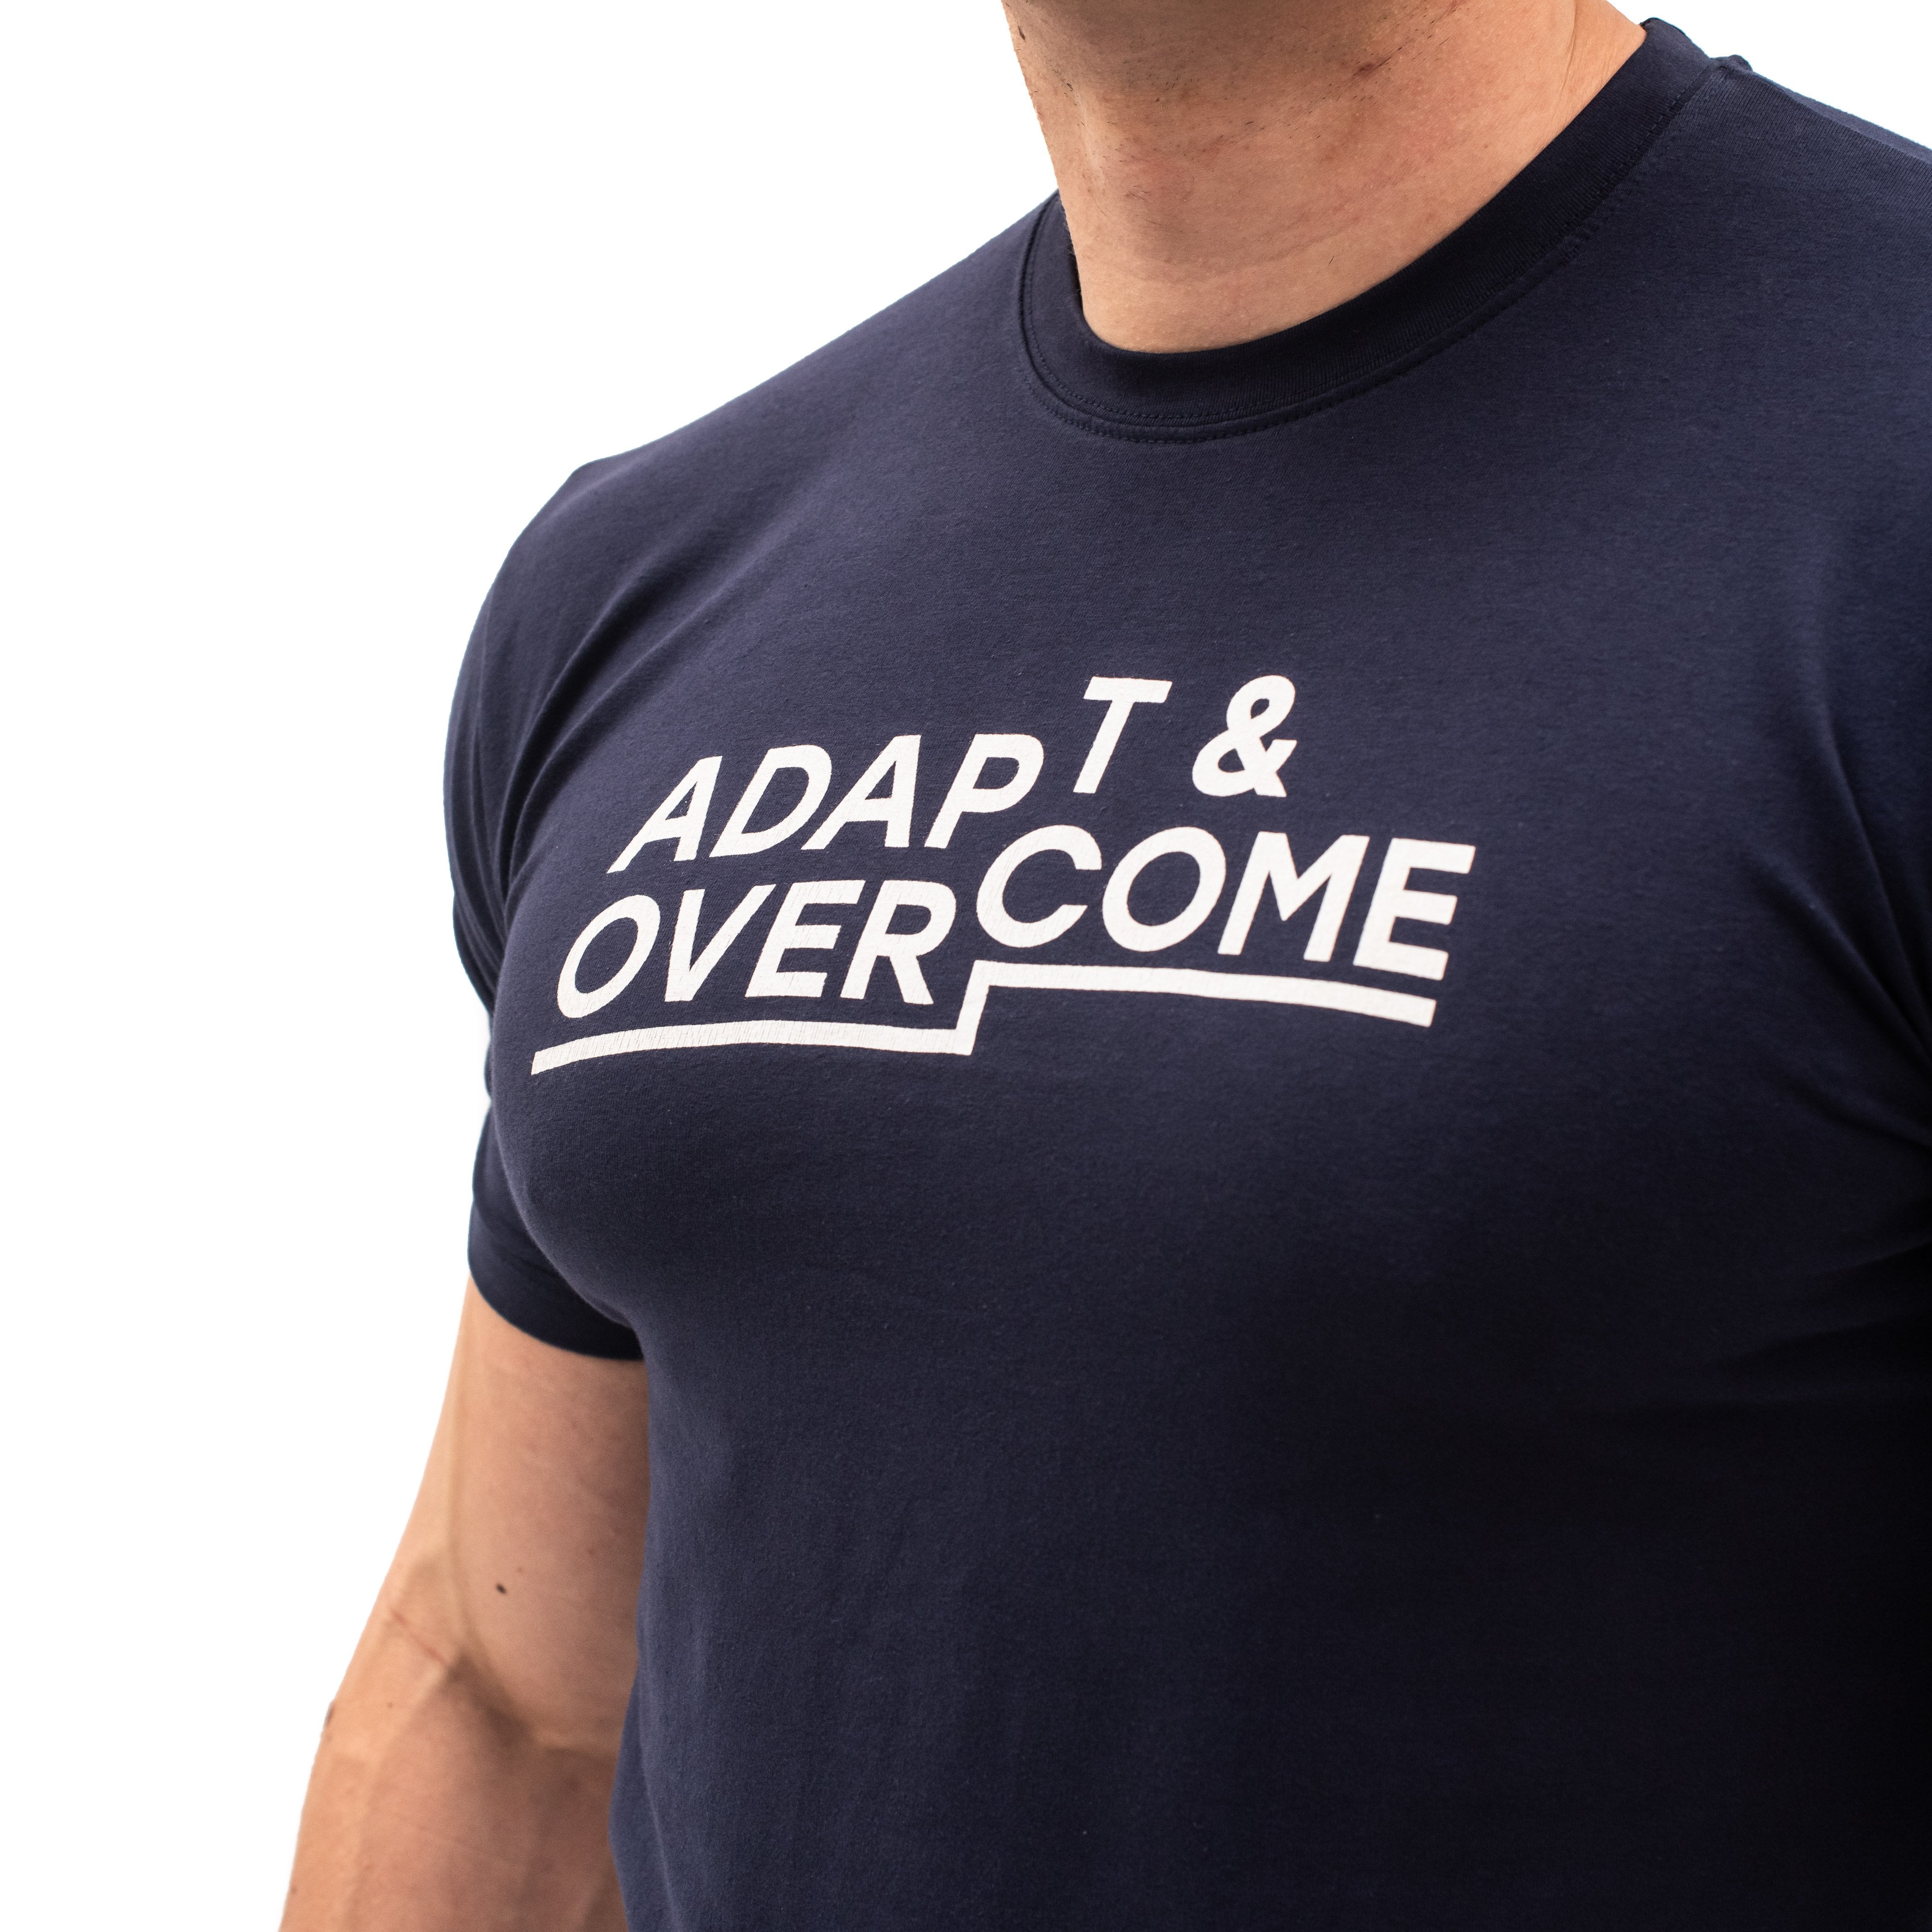 Adapt & Overcome Bar Grip T-shirt, great as a squat shirt. Purchase Adapt & Overcome Bar Grip tshirt UK from A7 UK or A7 Europe. No more chalk and no more sliding. Best Bar Grip Tshirts, shipping to UK and Europe from A7 UK or A7 Europe. The best Powerlifting apparel for all your workouts. Available in UK and Europe including France, Italy, Germany, Sweden and Poland